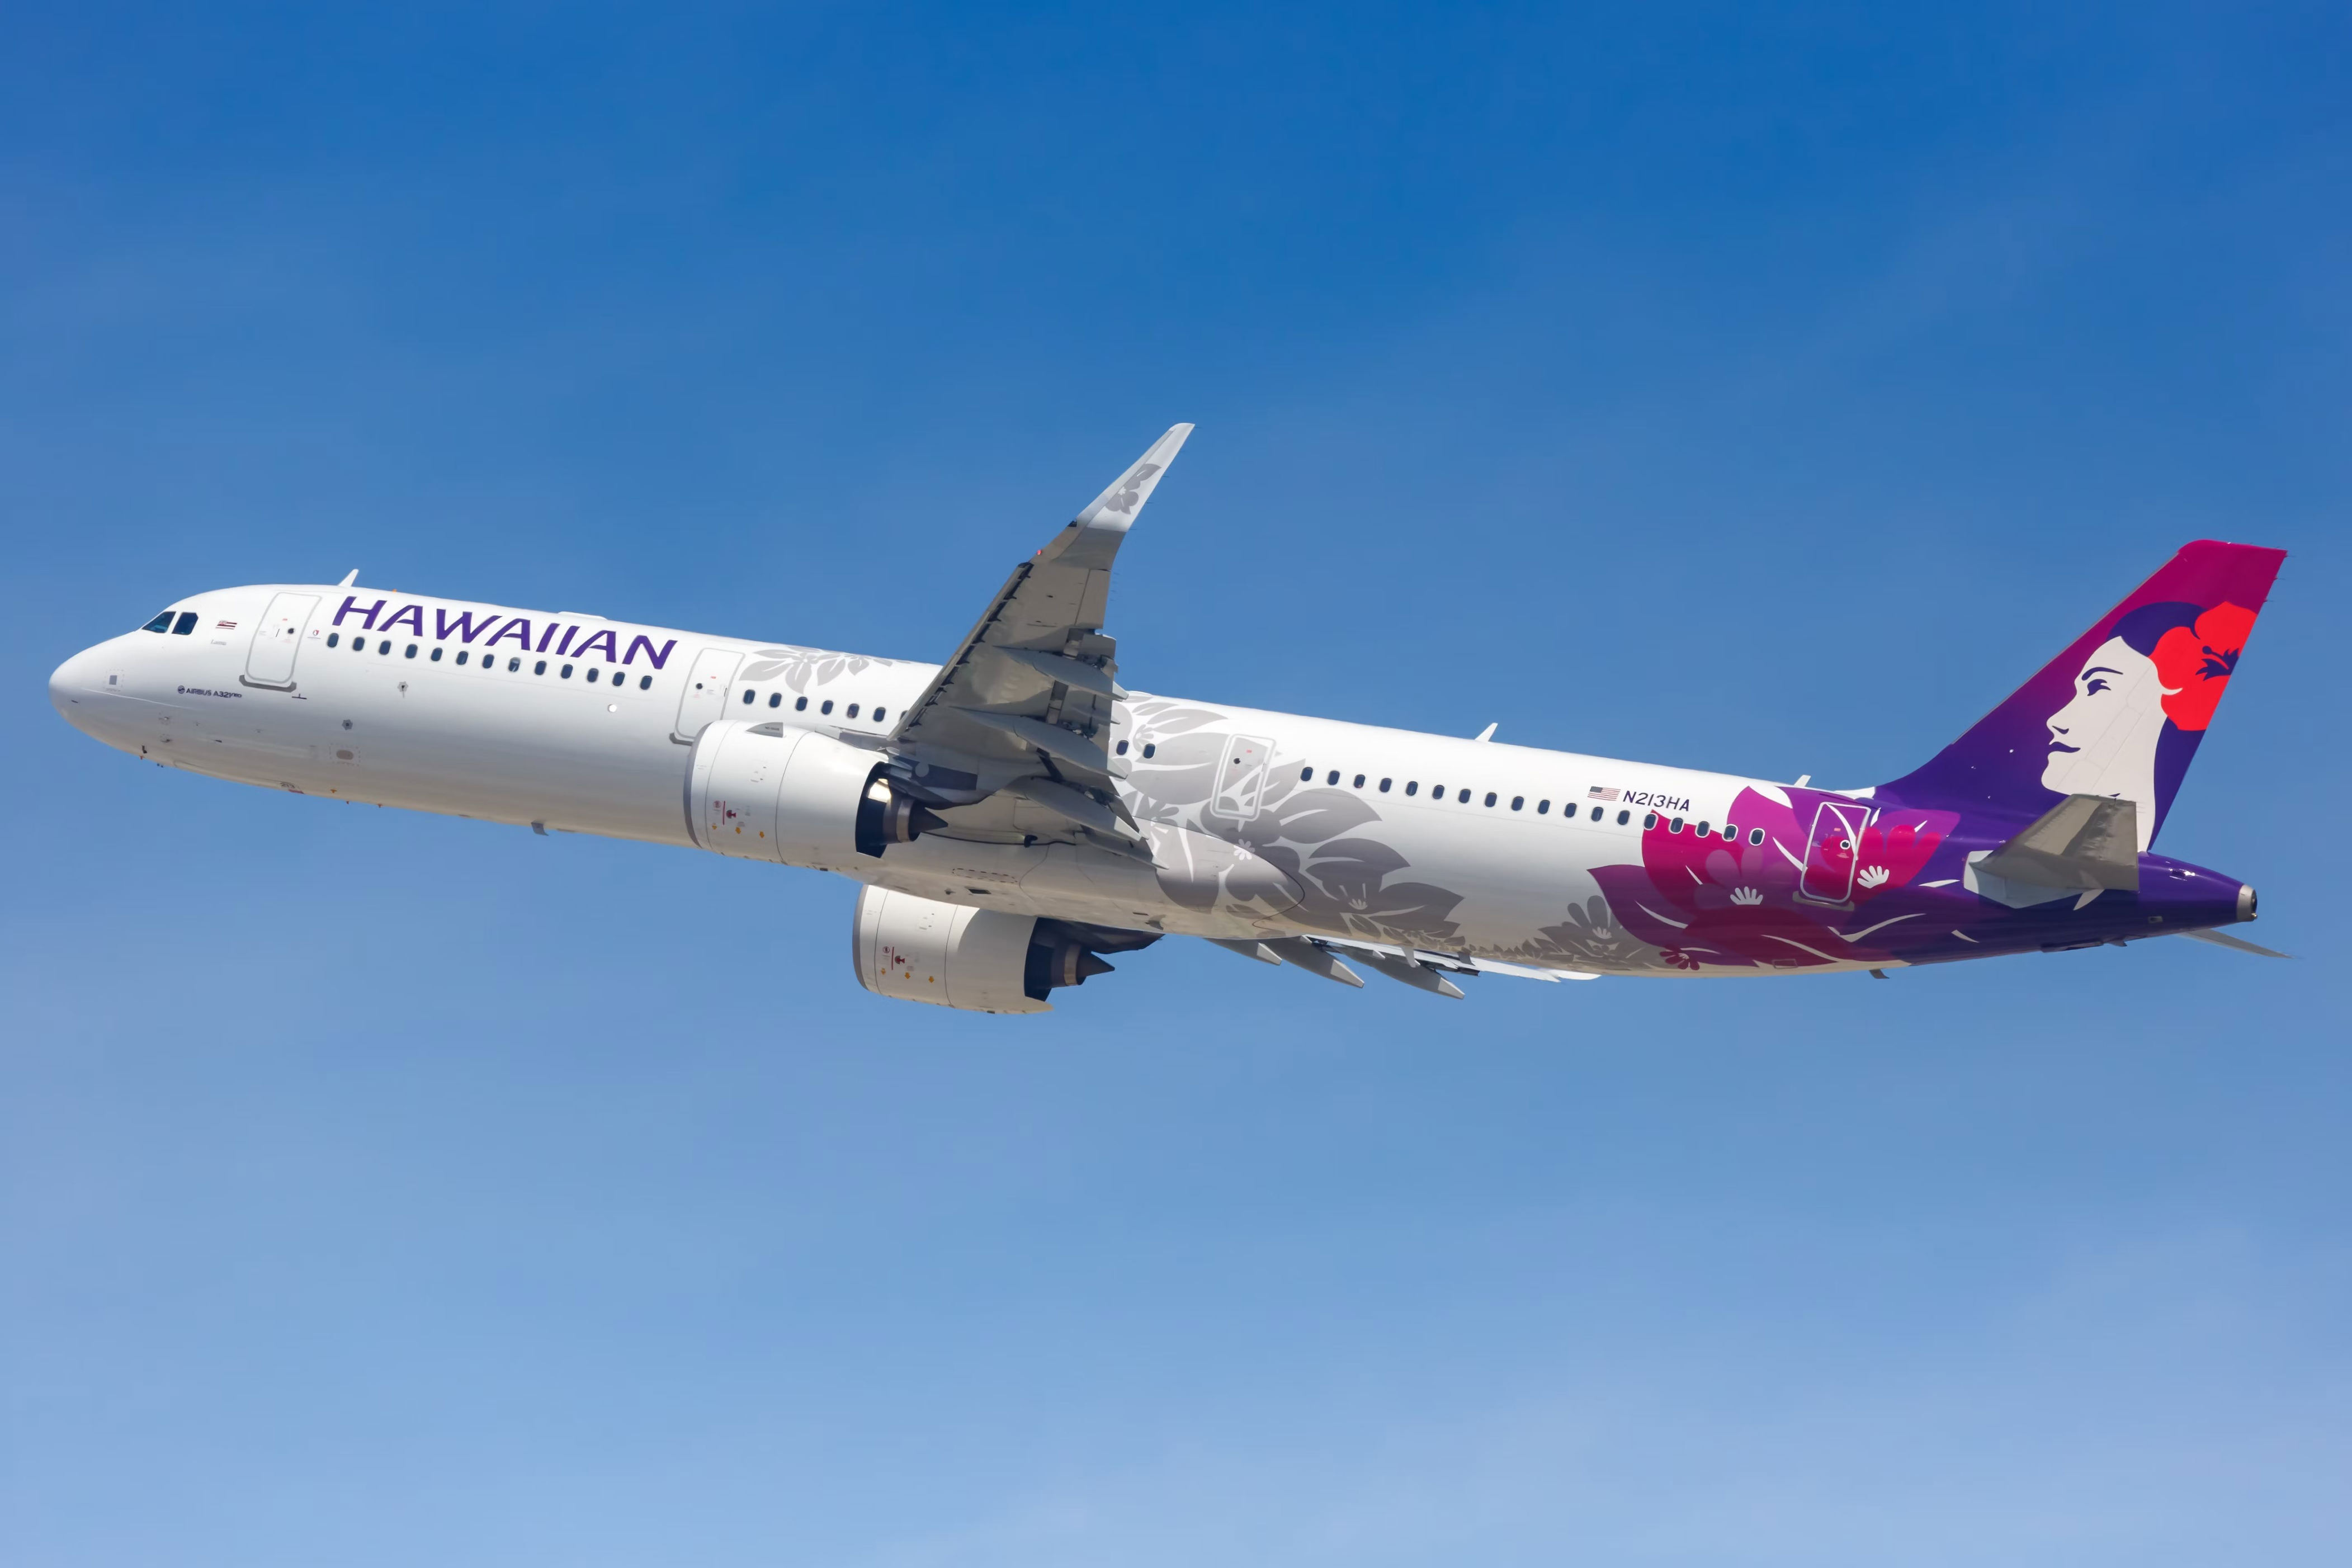 hawaiian airlines airbus a321neo sustained damages after a jet bridge collapse at san francisco airport